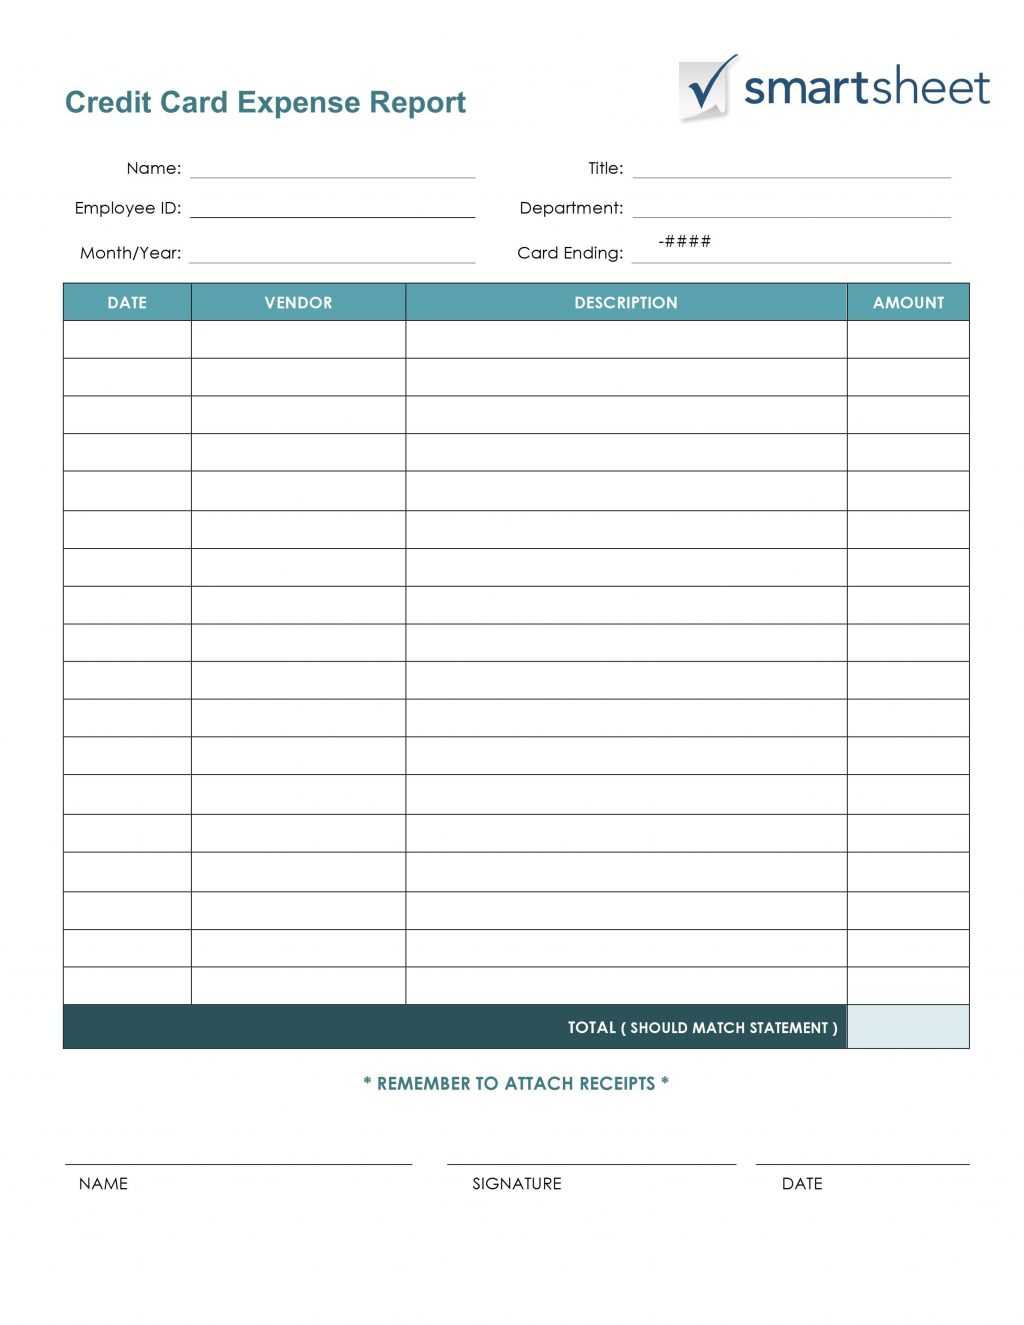 Credit Card Budget Spreadsheet Template Employee Expense Regarding Expense Report Spreadsheet Template Excel